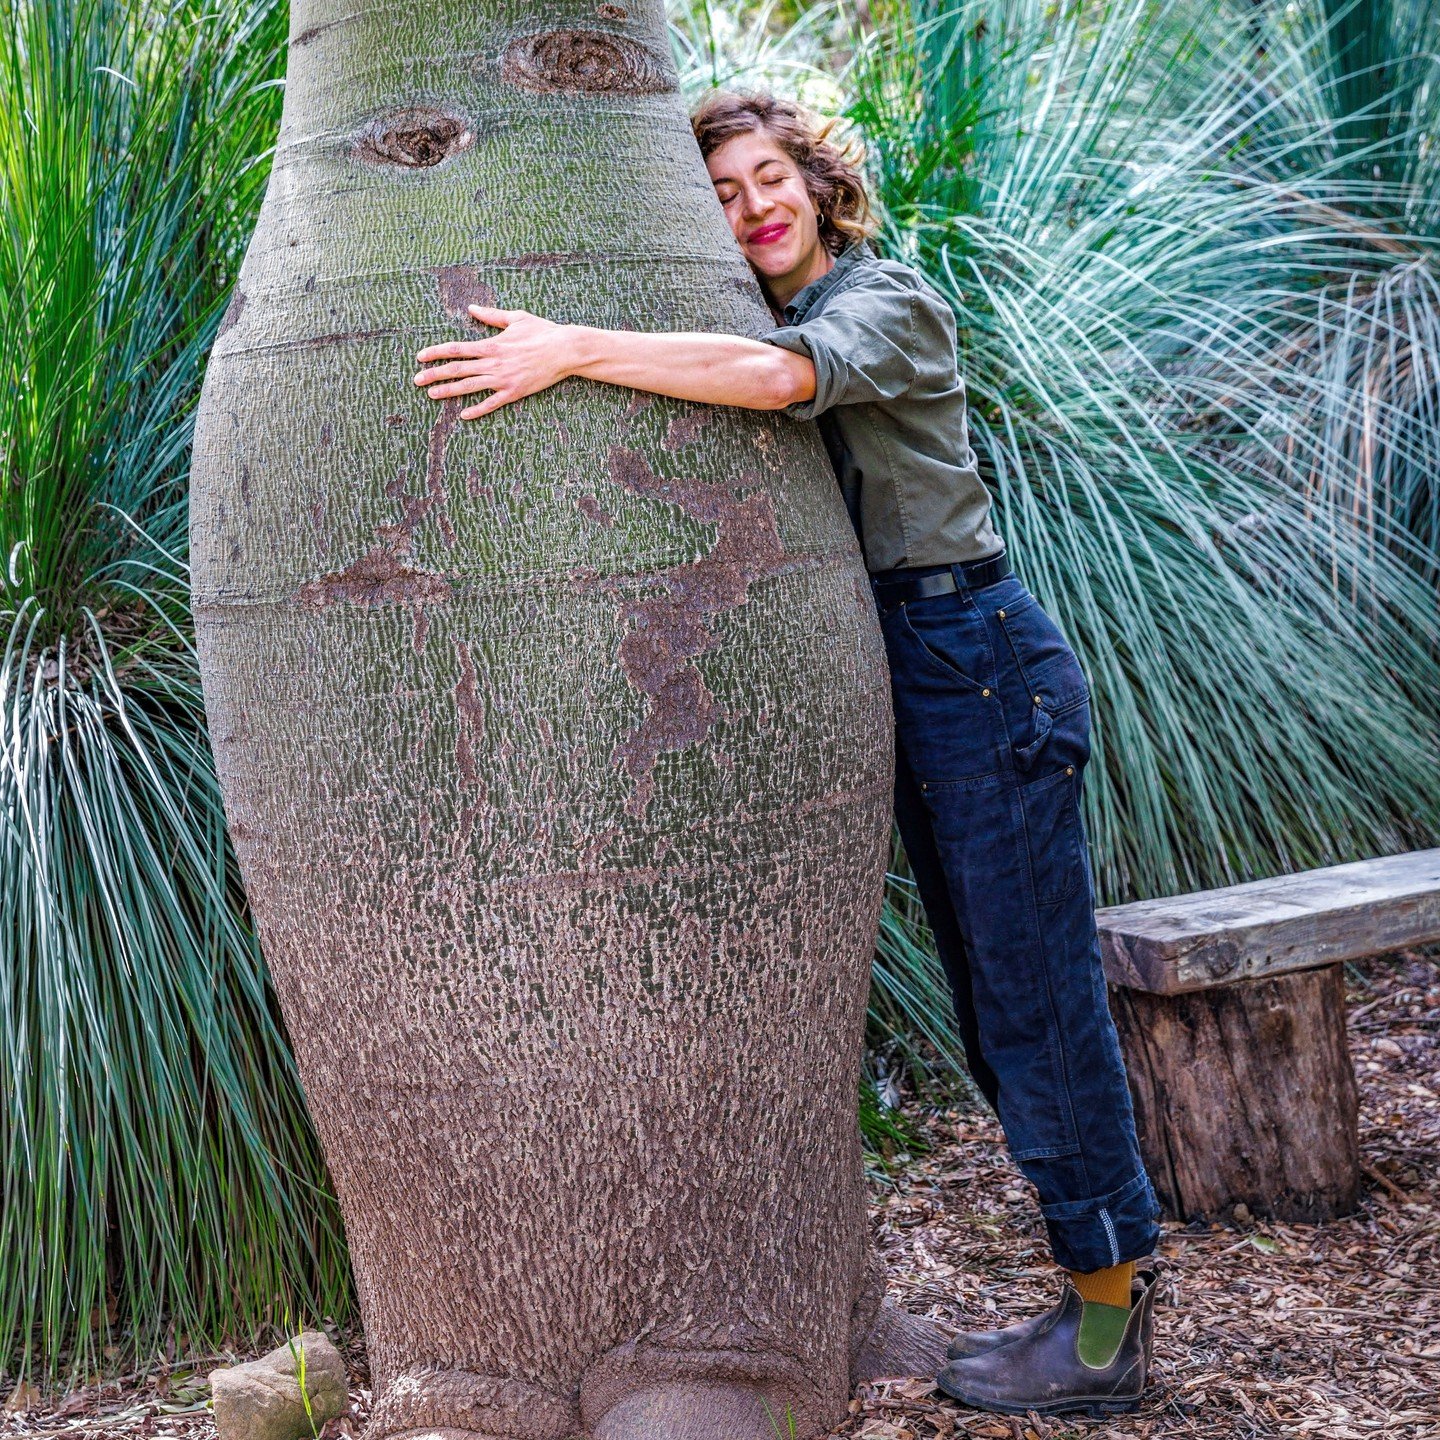 In honor of Earth Day, we thought you might like to know that Taft Gardens &amp; Nature Preserve has the most huggable trees!

According to the Scottish Wildlife Trust, &quot;Research shows that spending time around trees can reduce stress, improve i